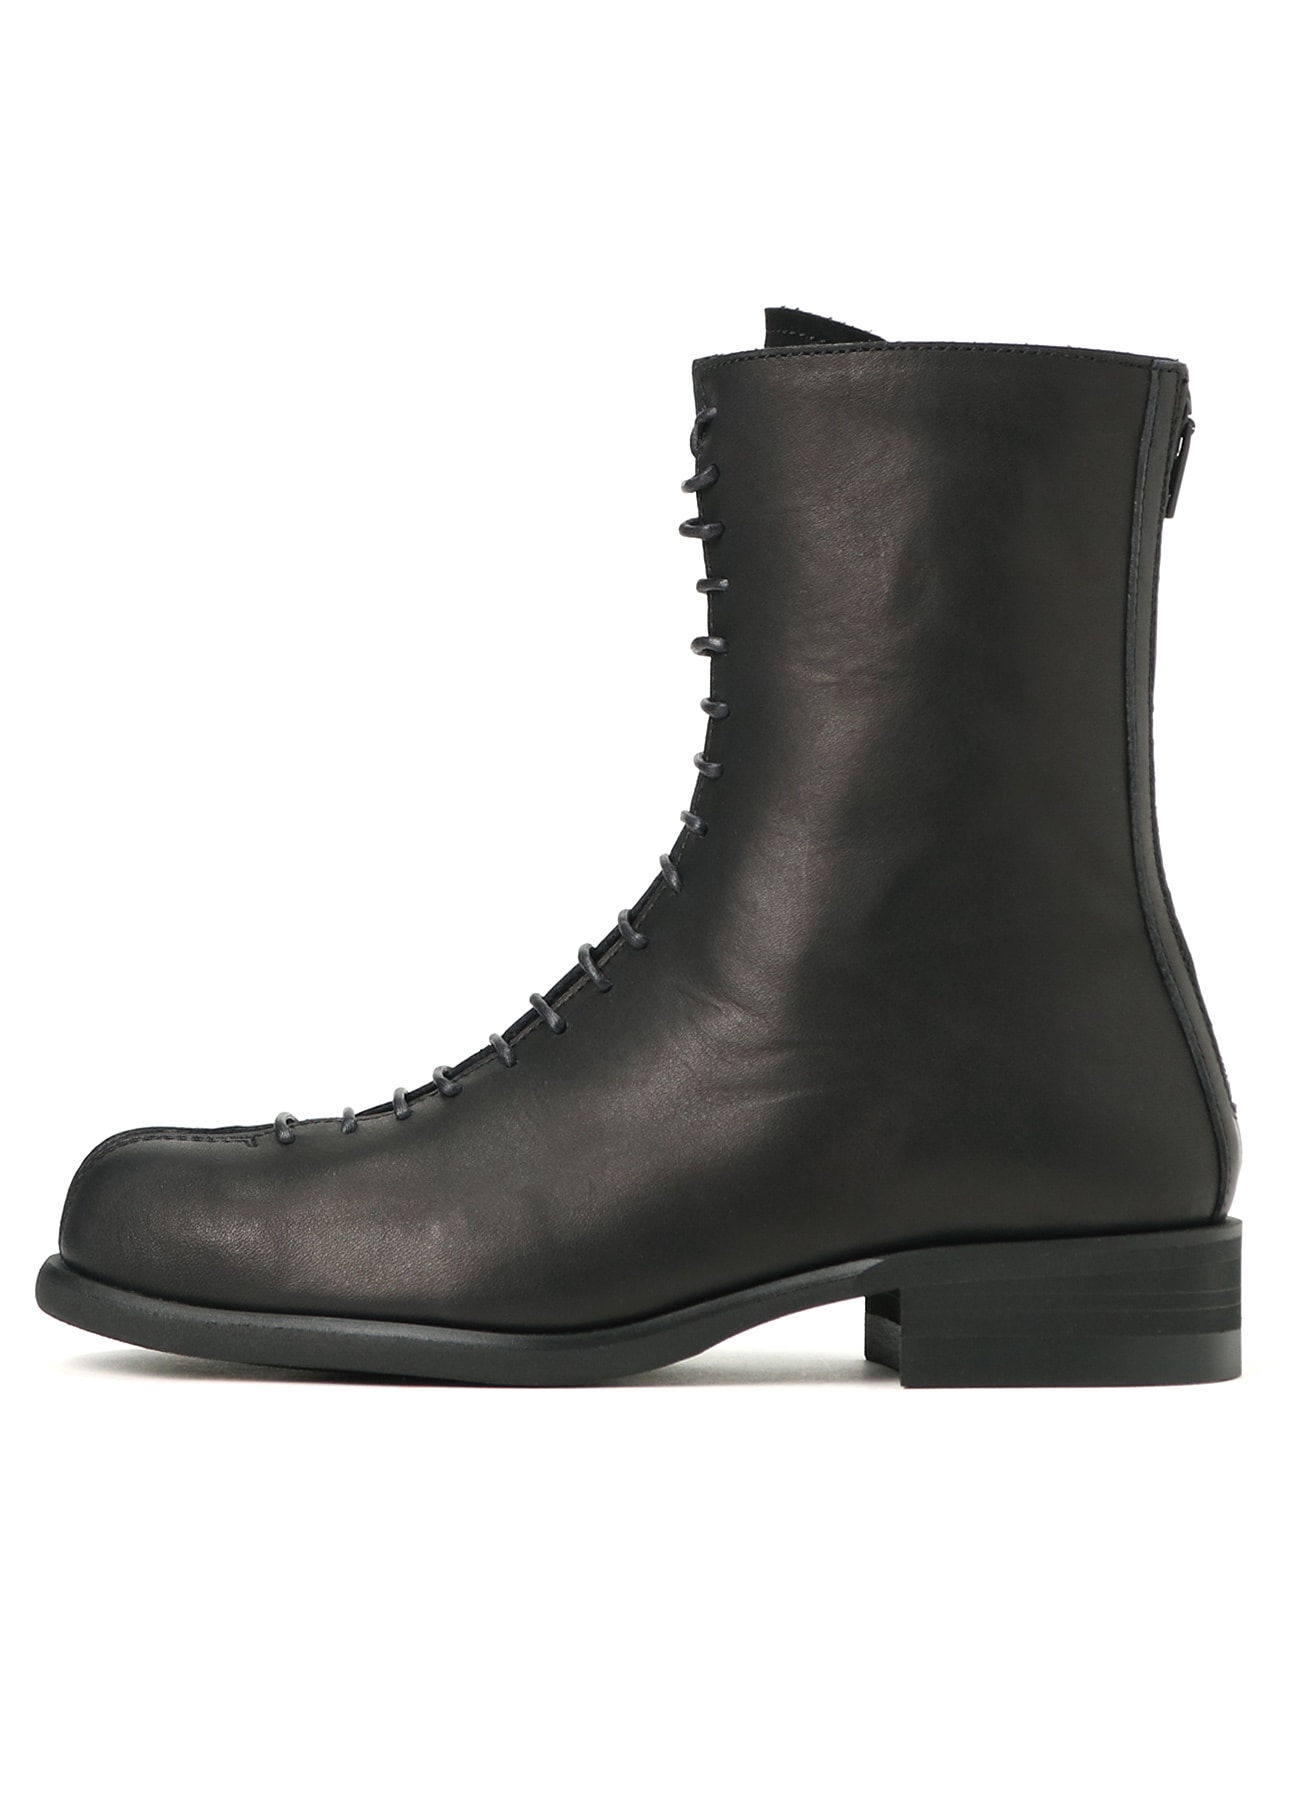 SEMI-GLOSS LEATHER LACE-UP BOOTS(US 5.5 Black): Vintage 1.1｜THE